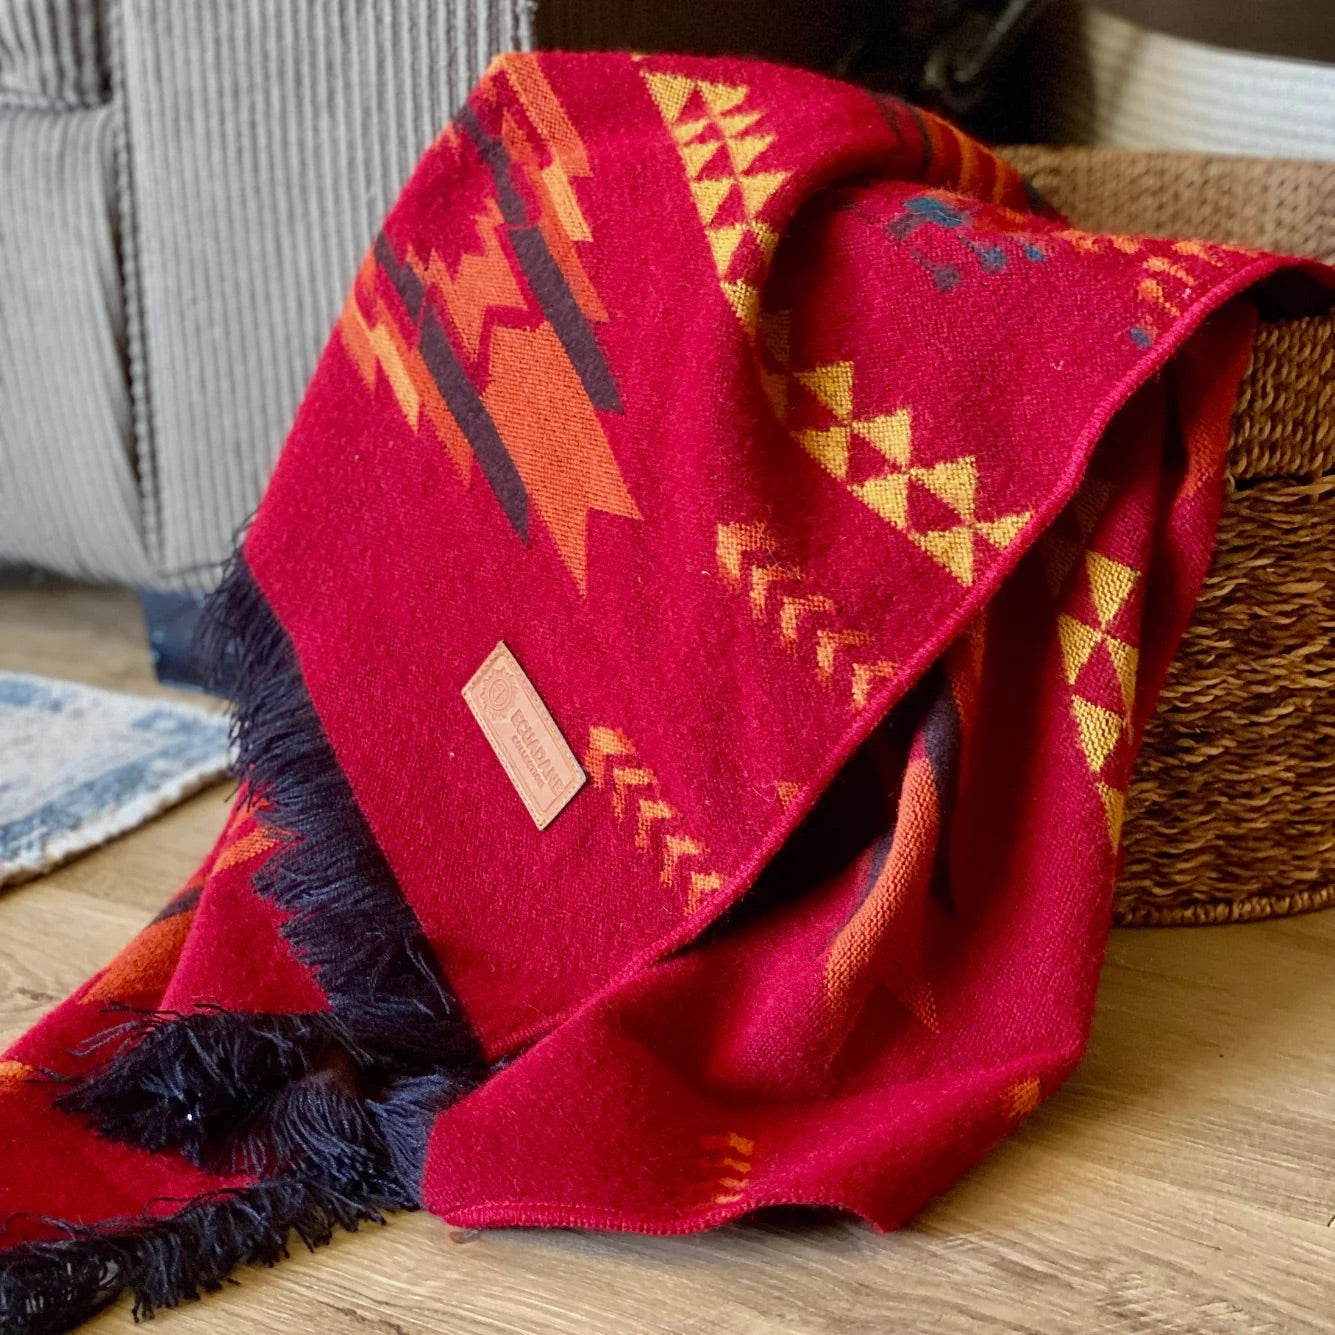 Can We Be Luxurious and Southwestern? Why Ecuadane Stands Out.